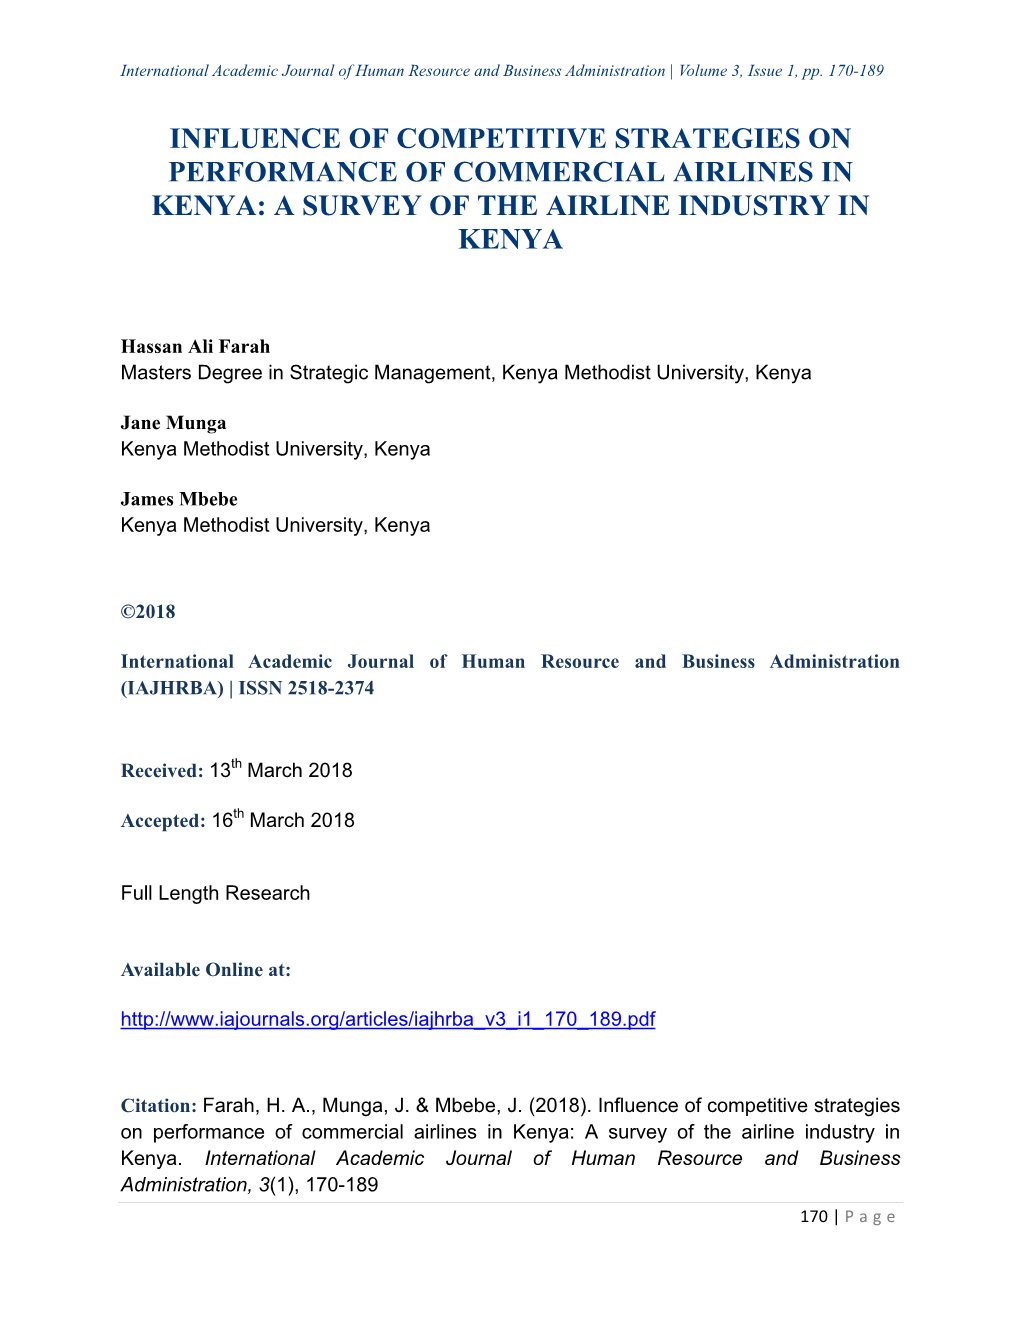 Influence of Competitive Strategies on Performance of Commercial Airlines in Kenya: a Survey of the Airline Industry in Kenya